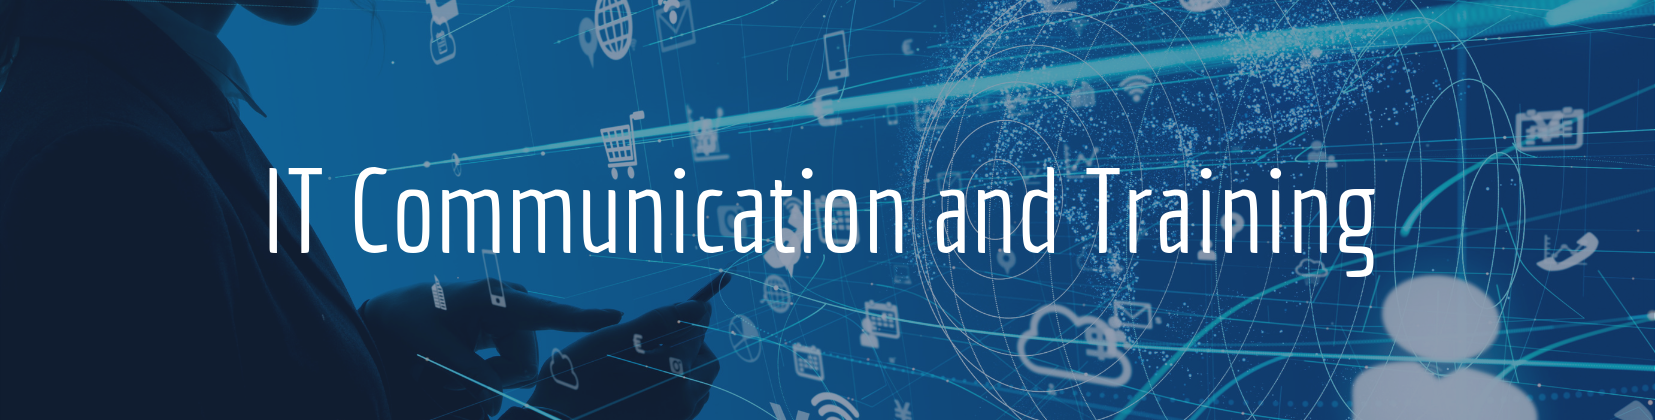 IT Communication and Training Banner